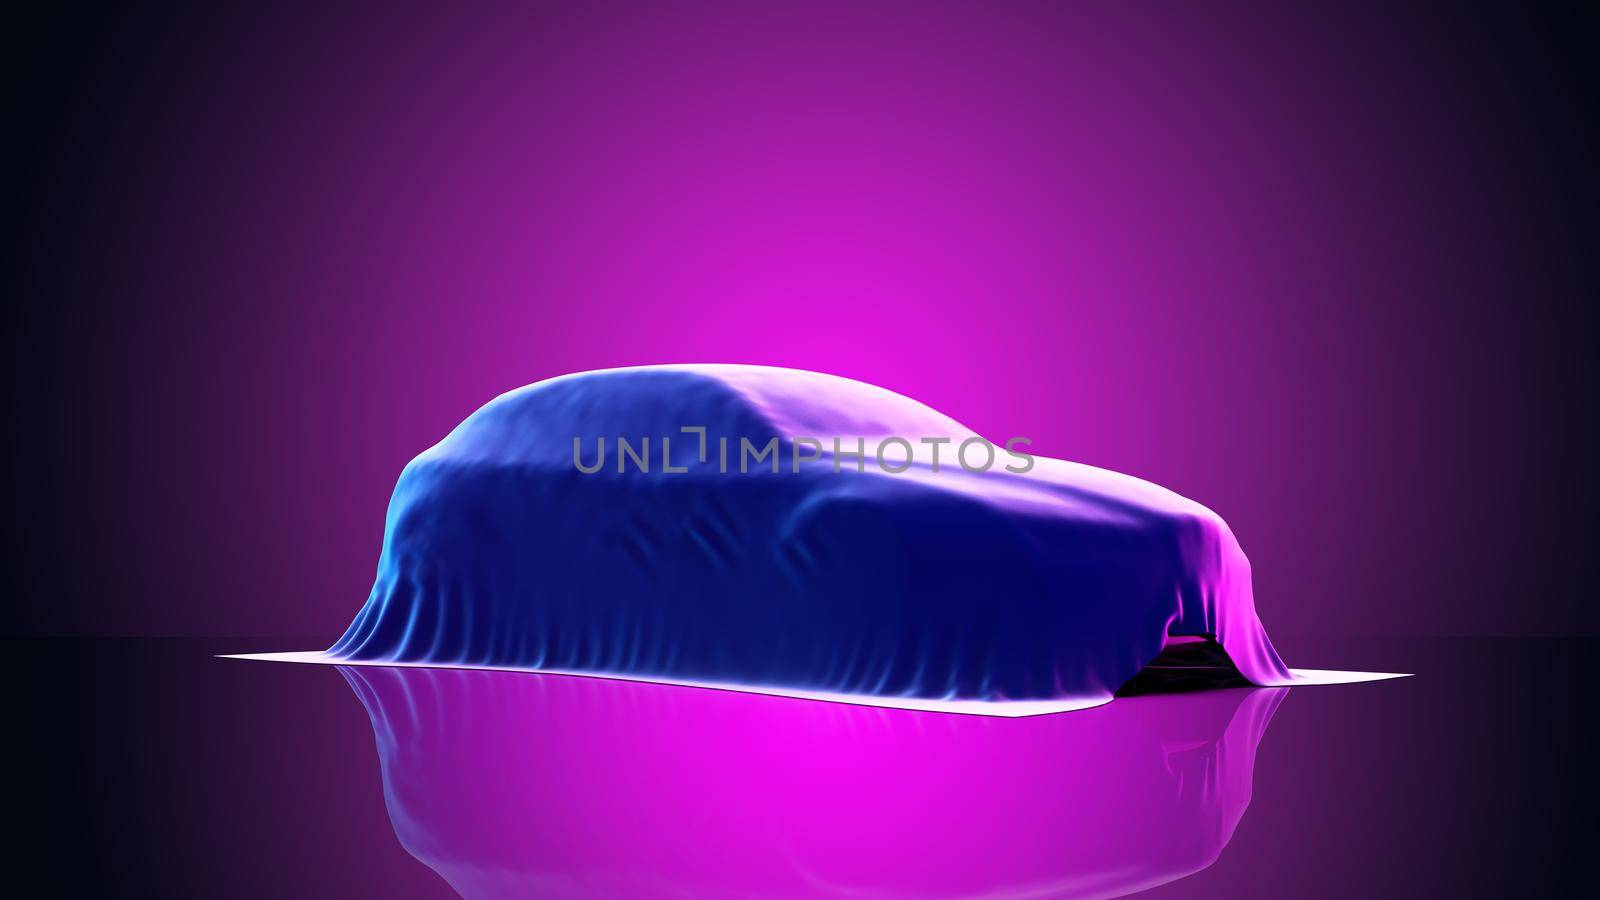 Car covered with velvet in blue - pink lights by cla78